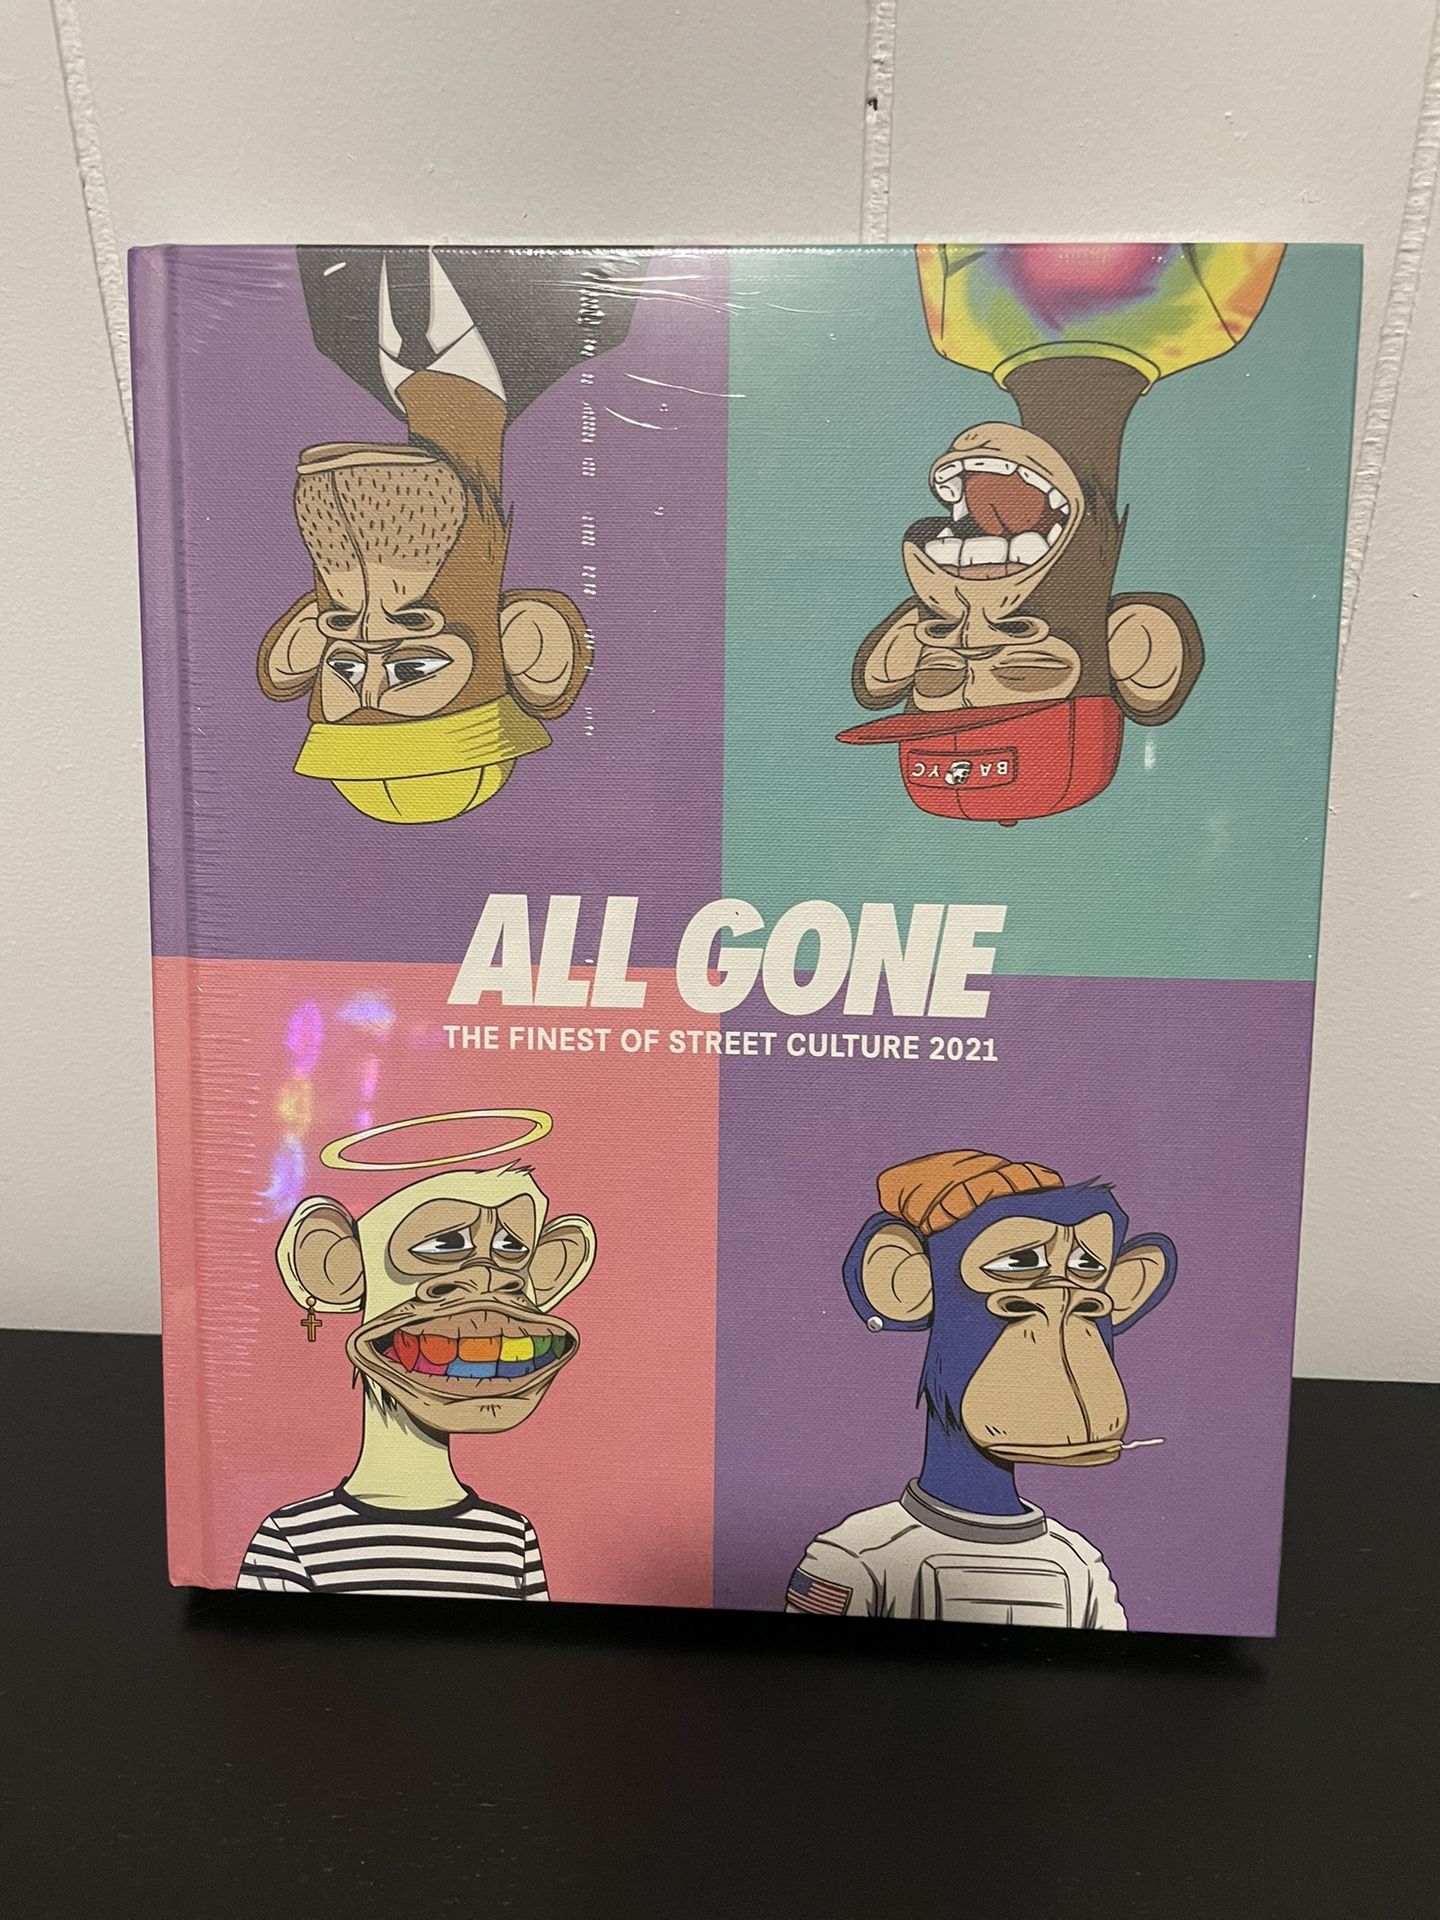 All Gone 2021 x Bored Ape Yacht Club BAYC The Finest of Street Culture Book